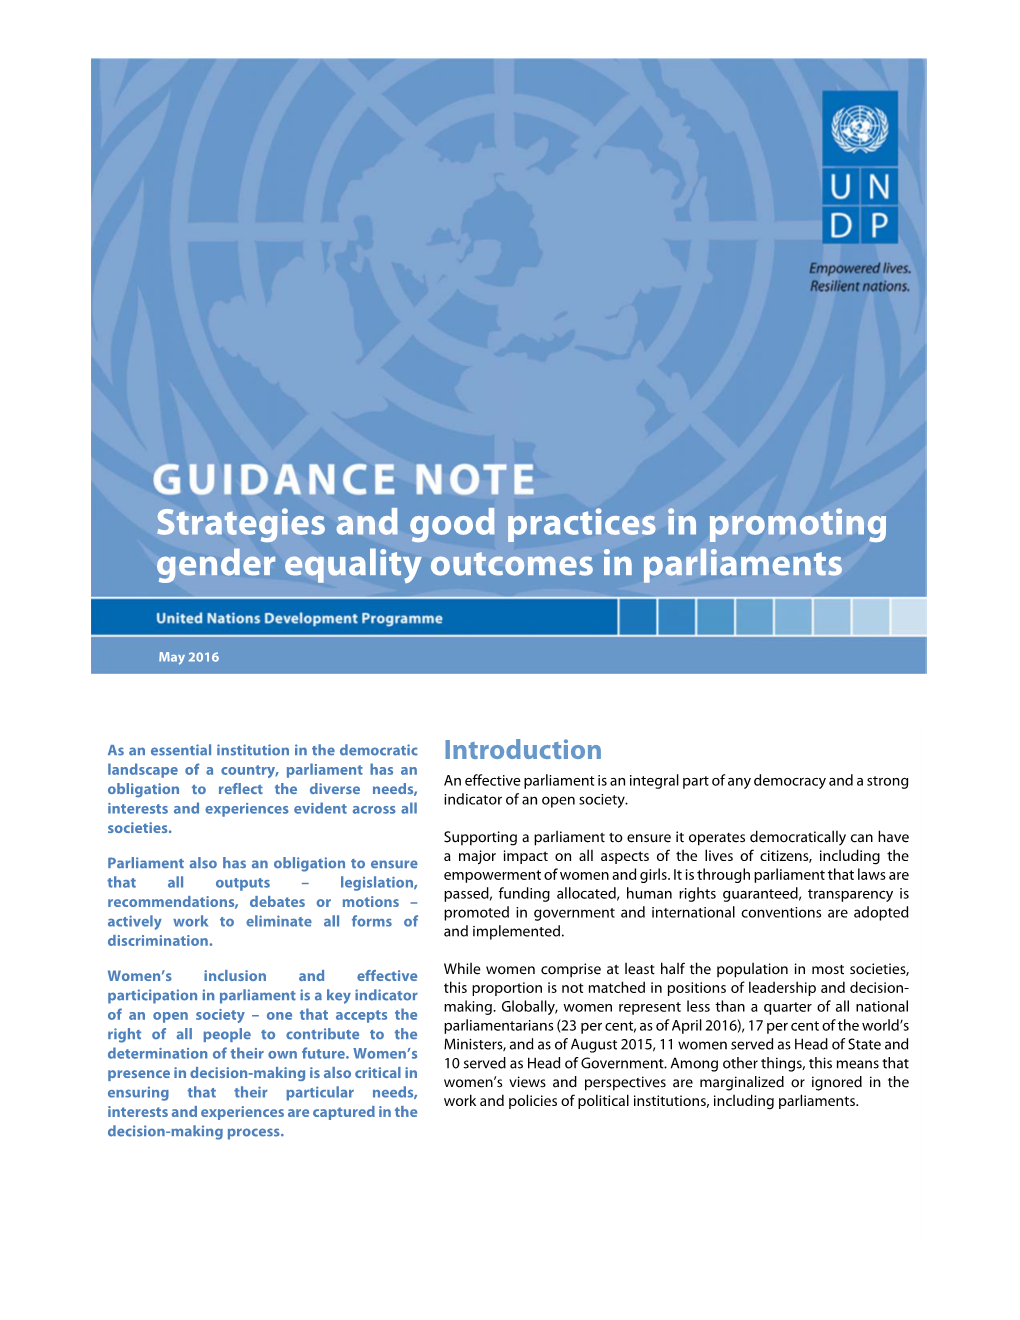 Strategies and Good Practices in Promoting Gender Equality Outcomes in Parliaments